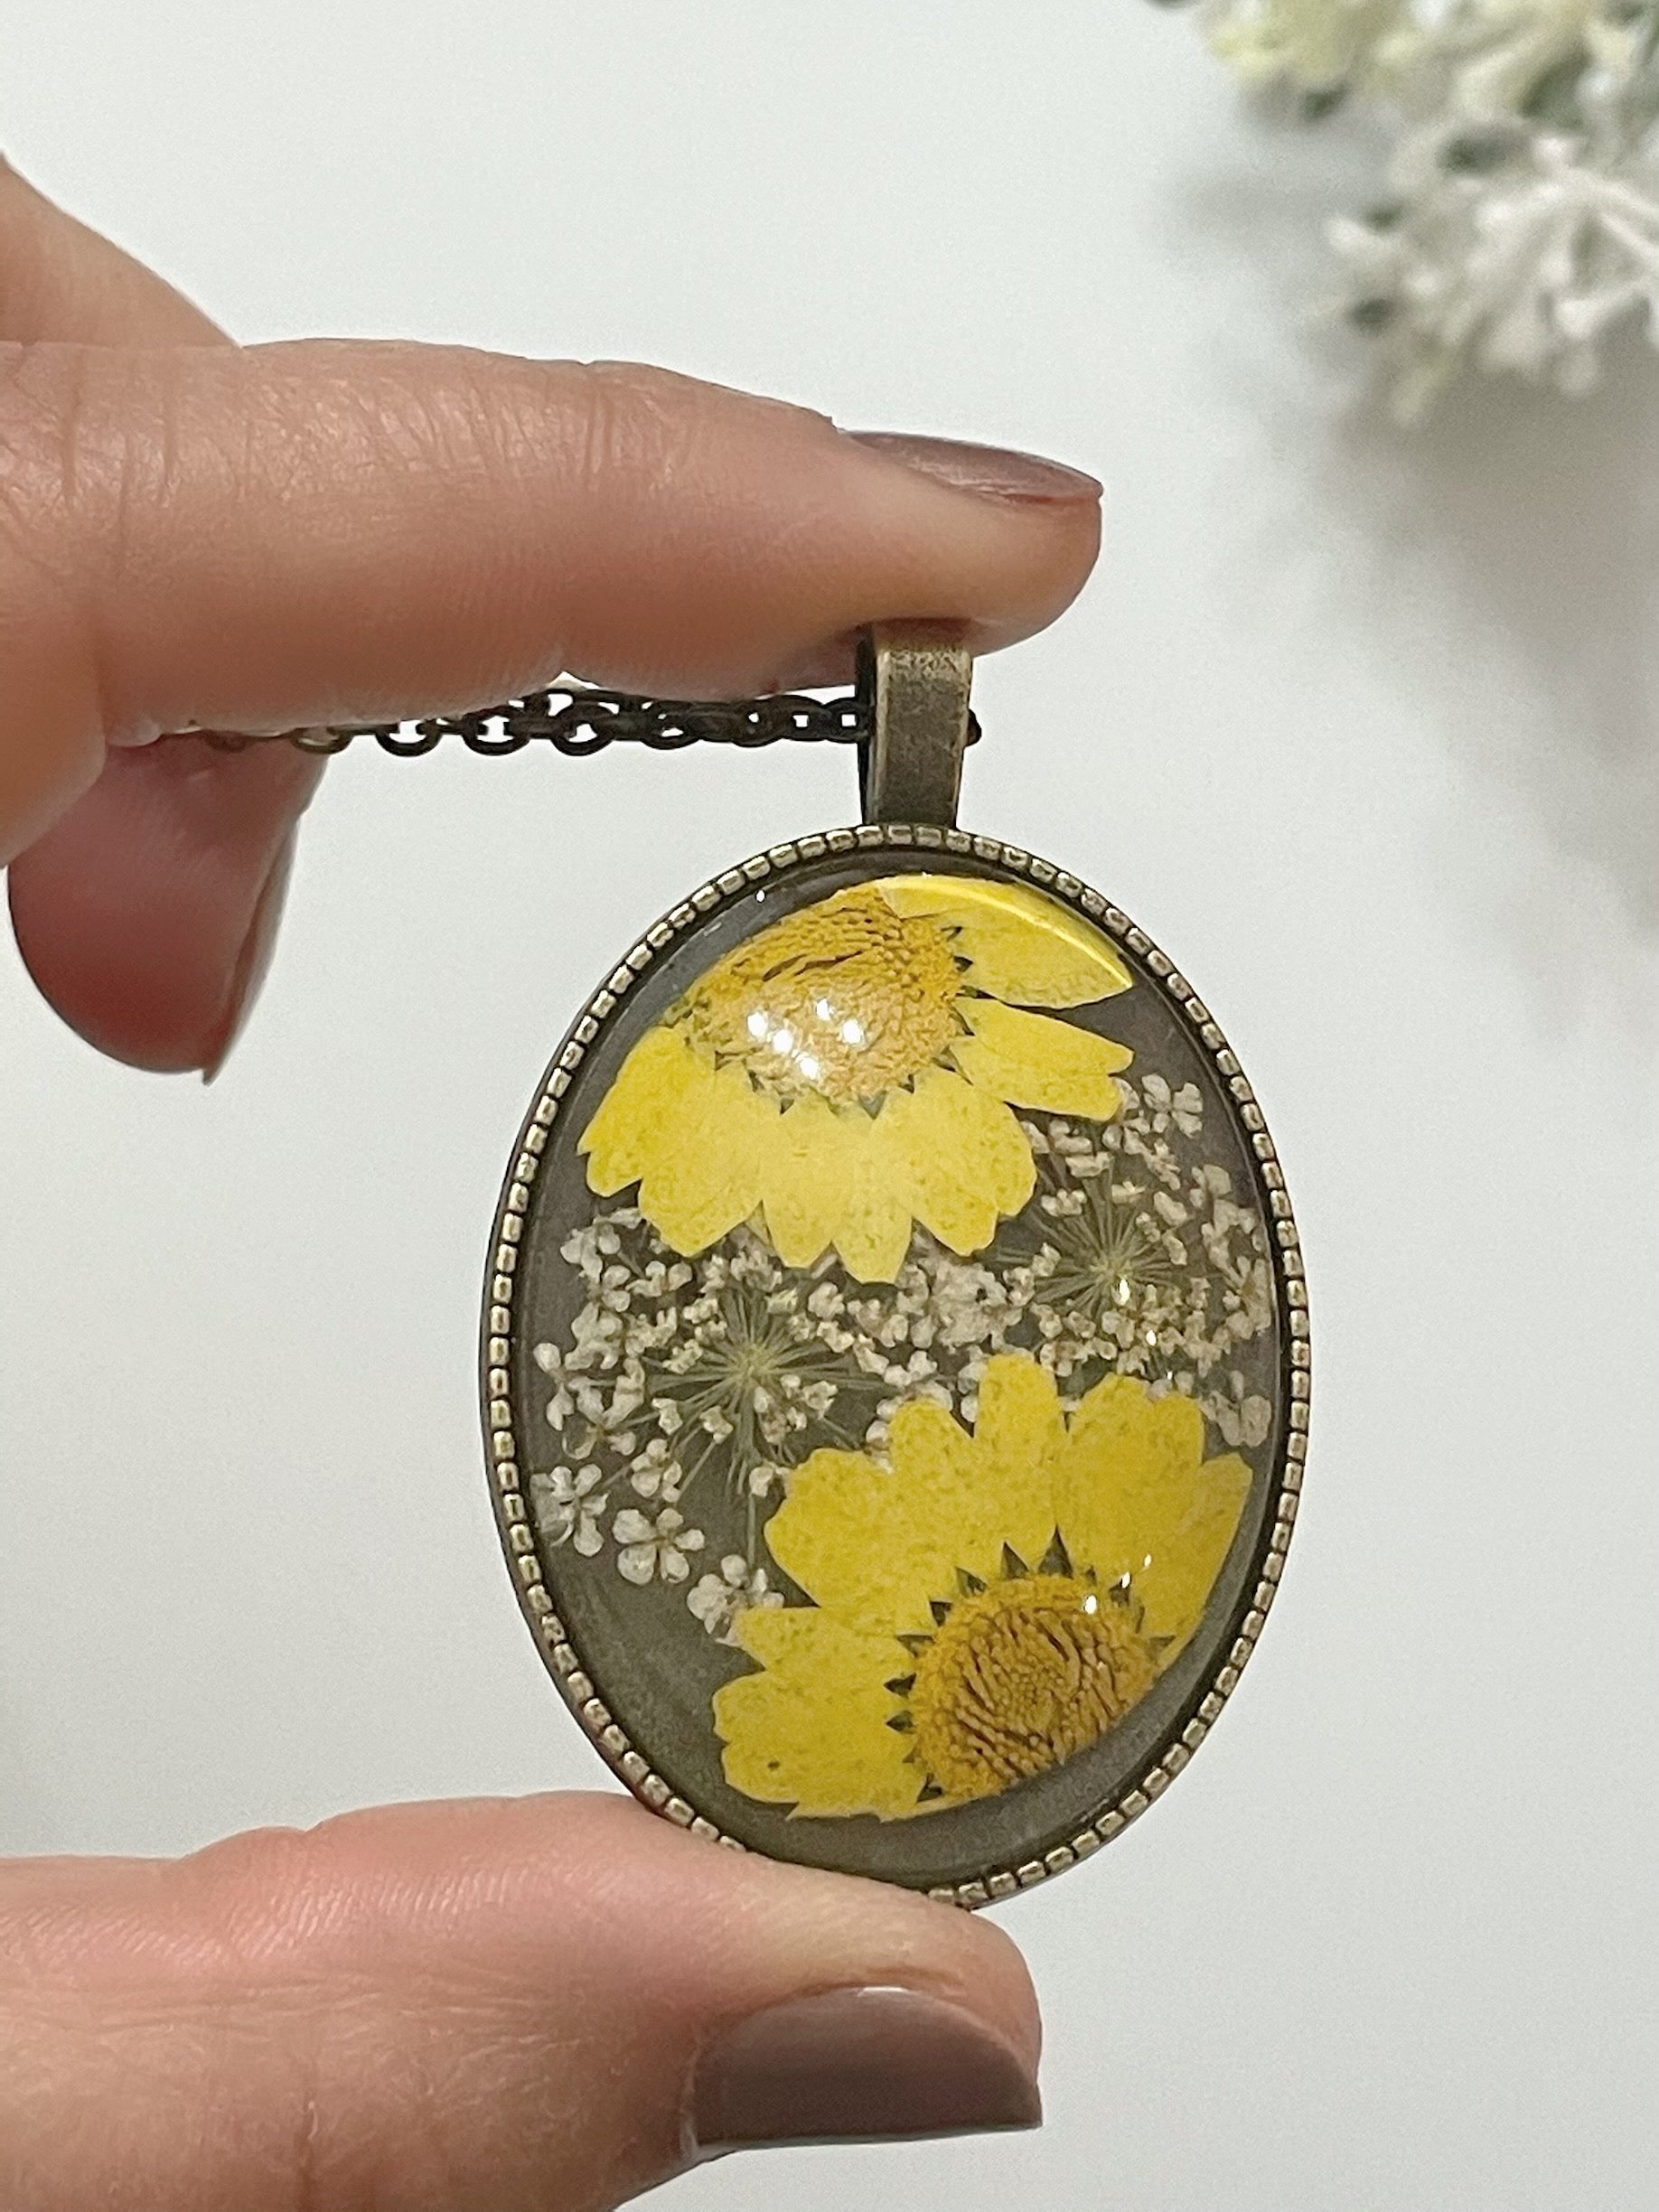 Natural Pressed and Dried Flowers Necklace Encased in Resin